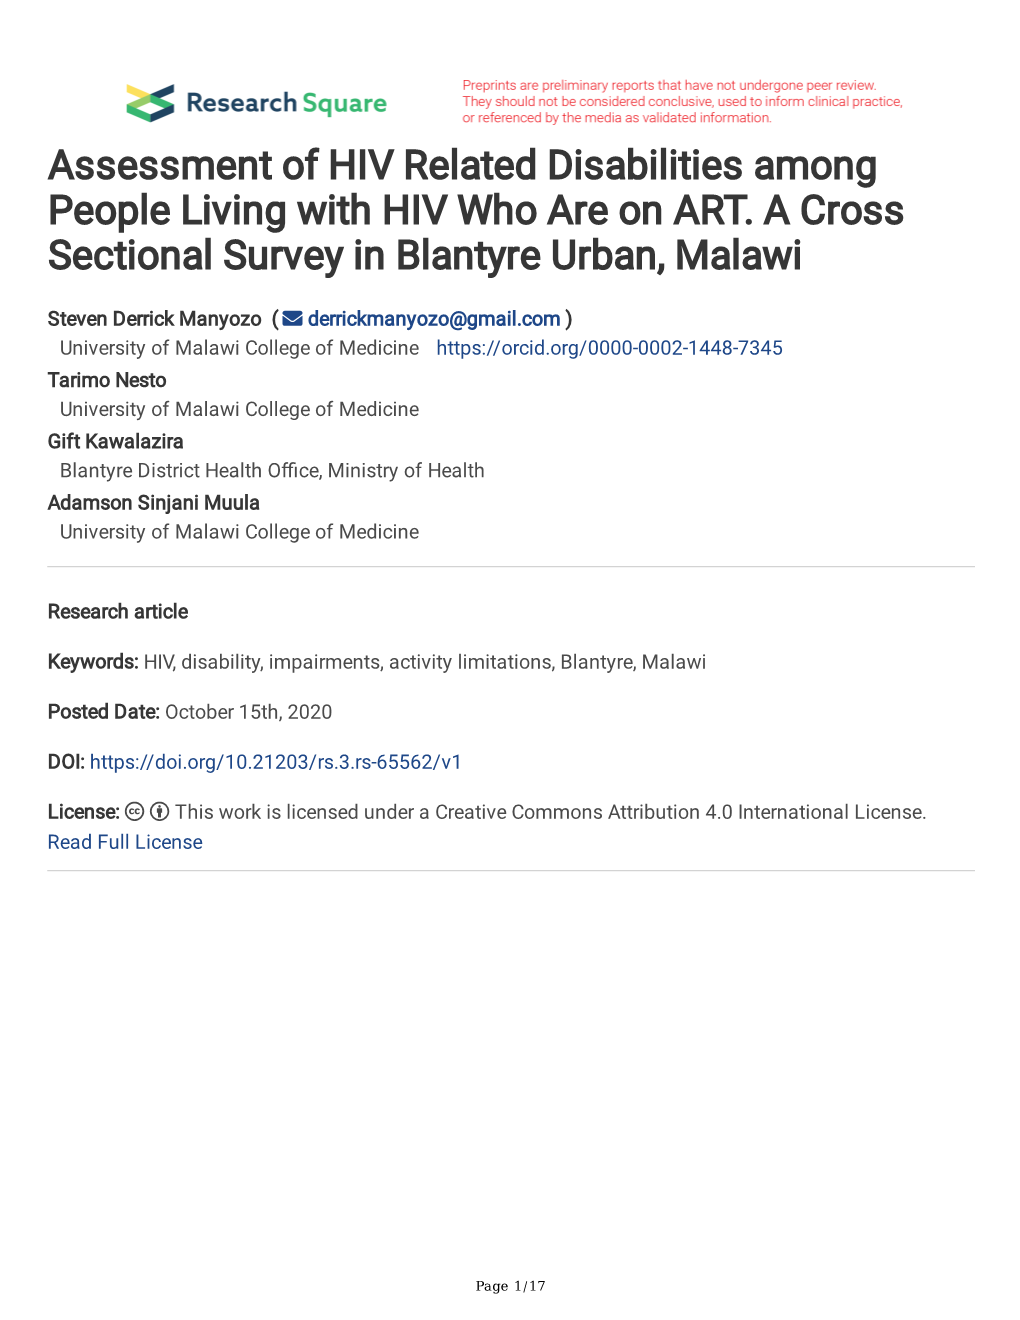 Assessment of HIV Related Disabilities Among People Living with HIV Who Are on ART